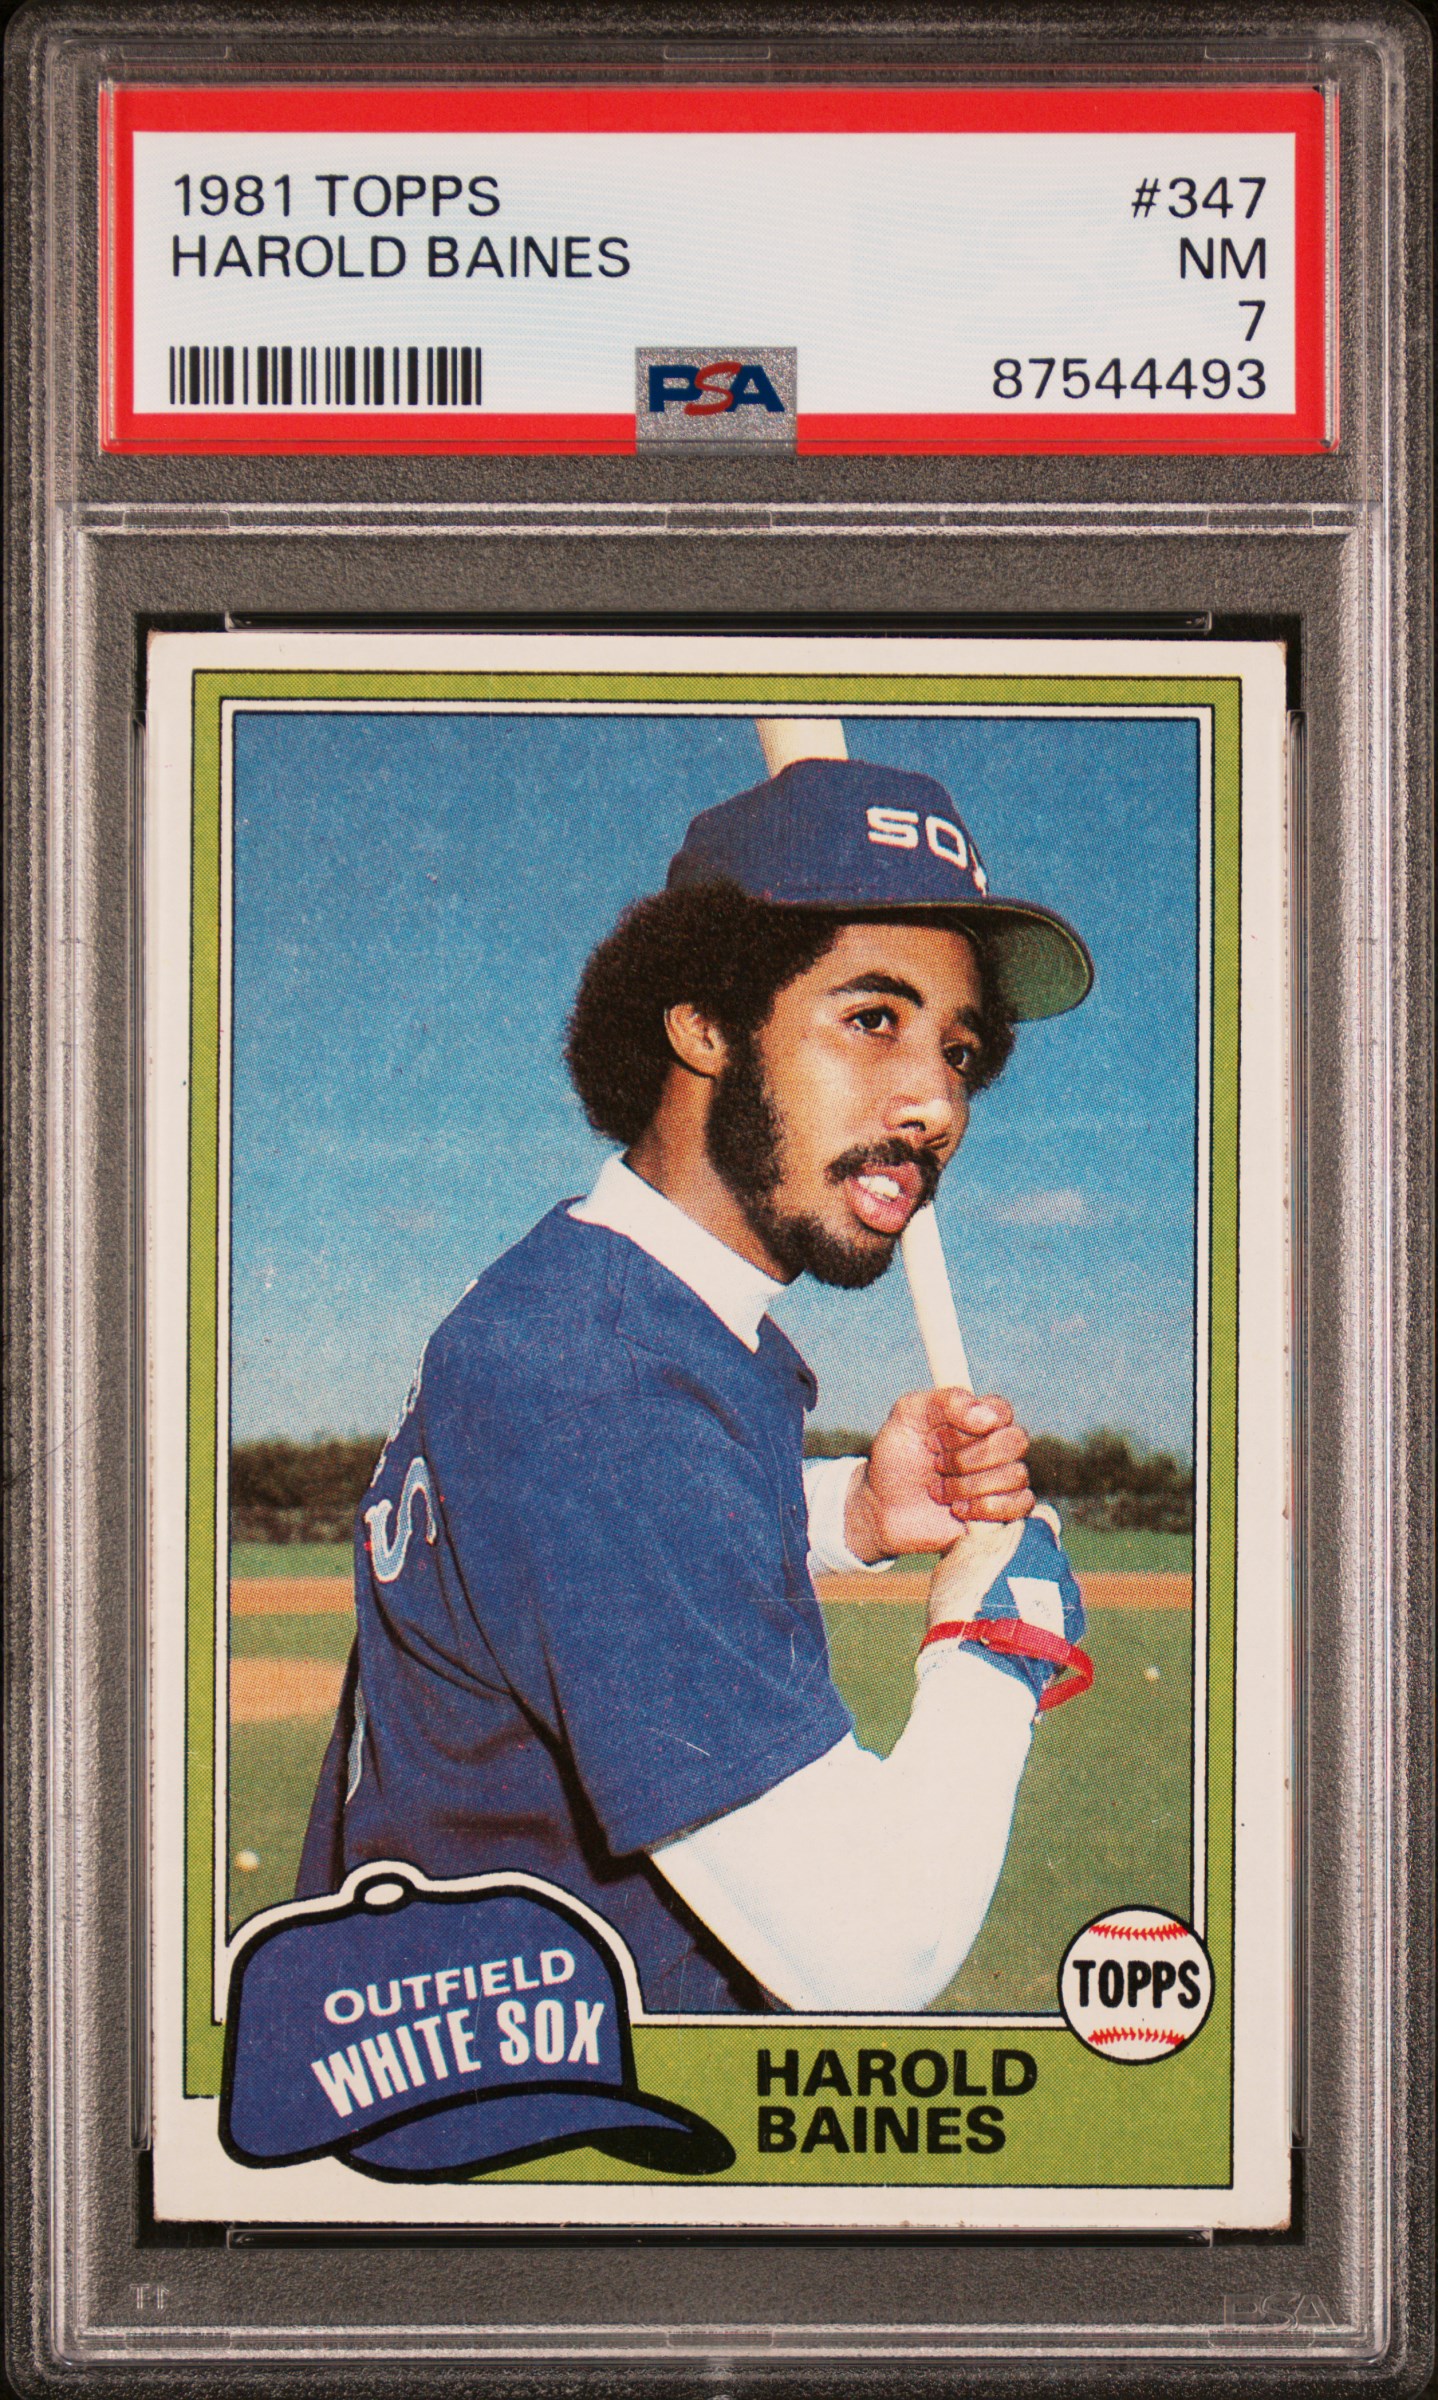 1981 Topps #347 Harold Baines Rookie Card – PSA NM 7